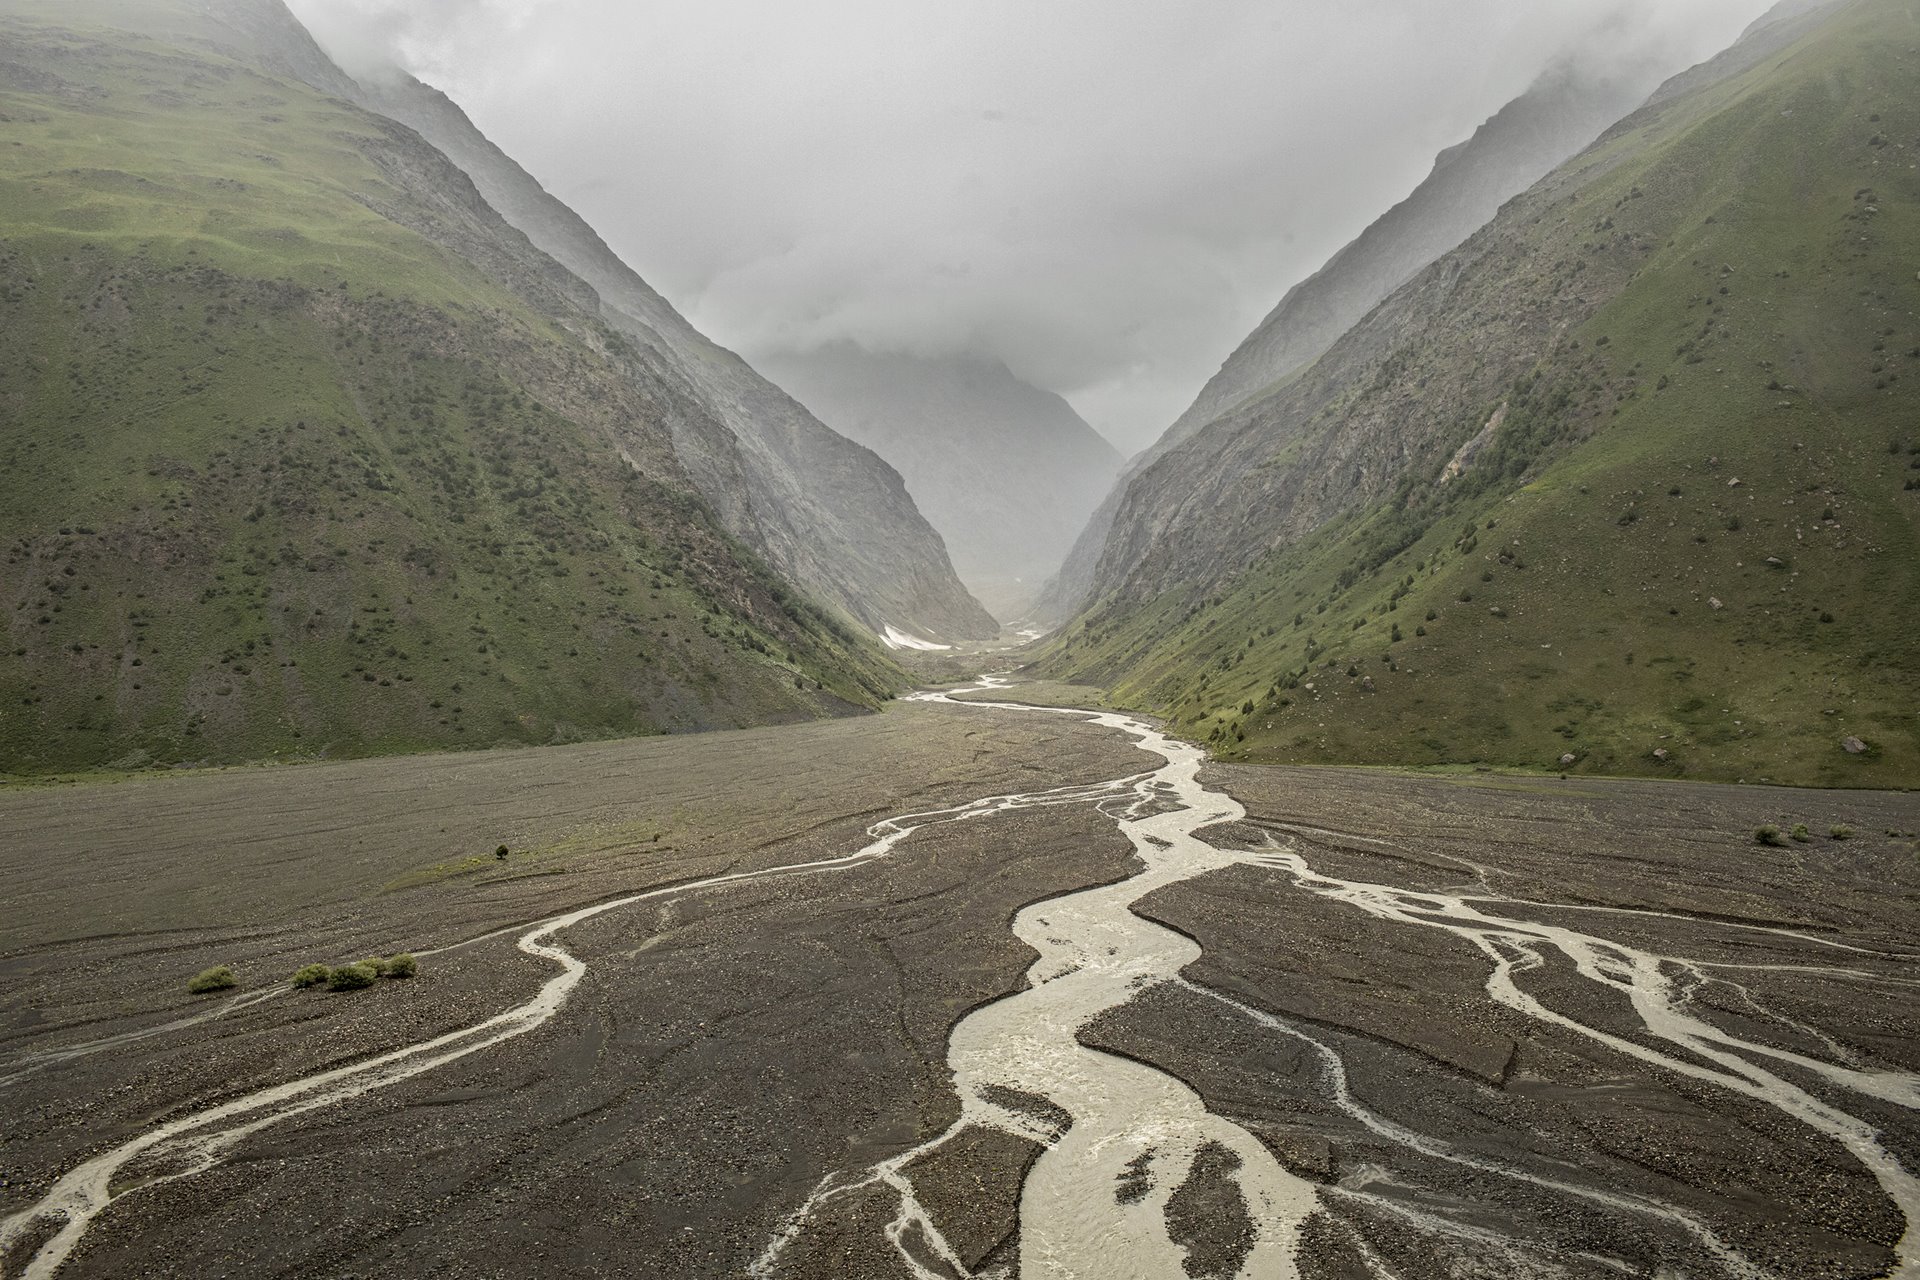 Vegetation grows in the riverbed of the Zeravshan River, in Tajikistan. The glacier feeding the river has retreated nearly a kilometer in the last 20 years. The Zeravshan is a former tributary of the Amu Darya River, but its water no longer reaches the Amu Darya as it is diverted through canals in Uzbekistan.